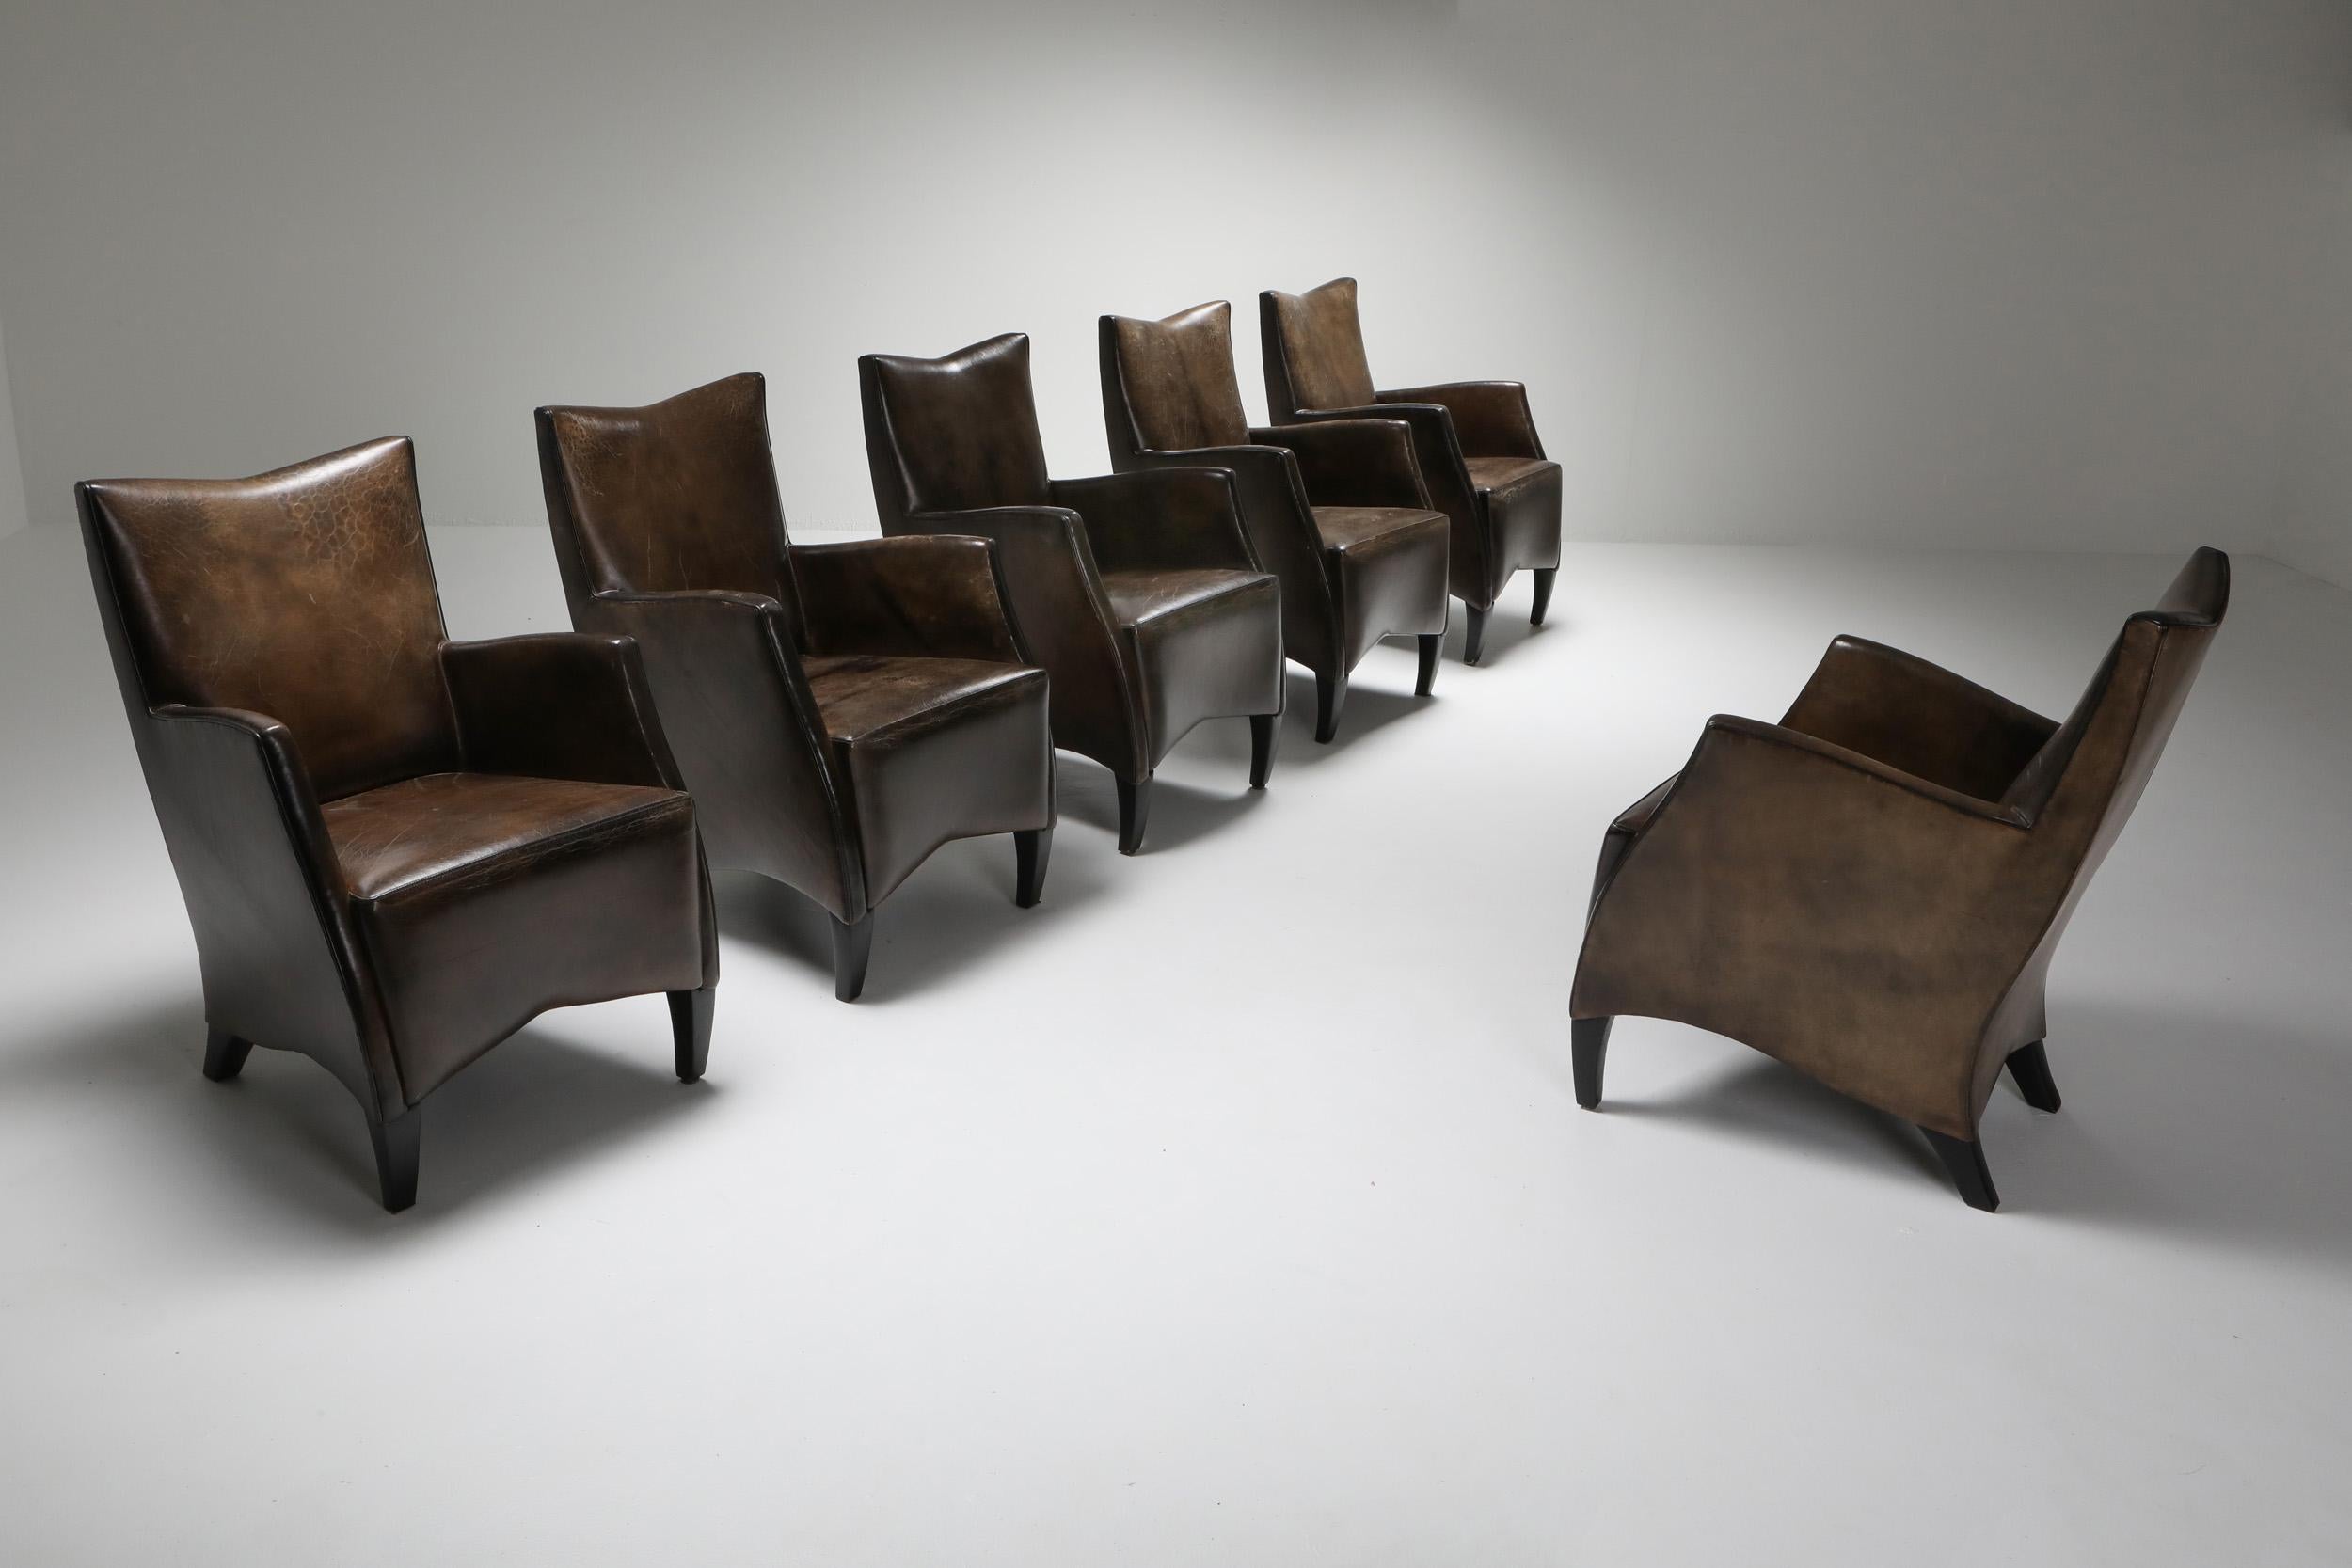 Art Deco High-end leather armchairs by Bart Van Bekhoven, The Netherlands 1970s, set of six

In a style which is more contemporary and organic than Classic Art Deco, 
and an unmatched quality as even the legs are covered in leather. 
A true master